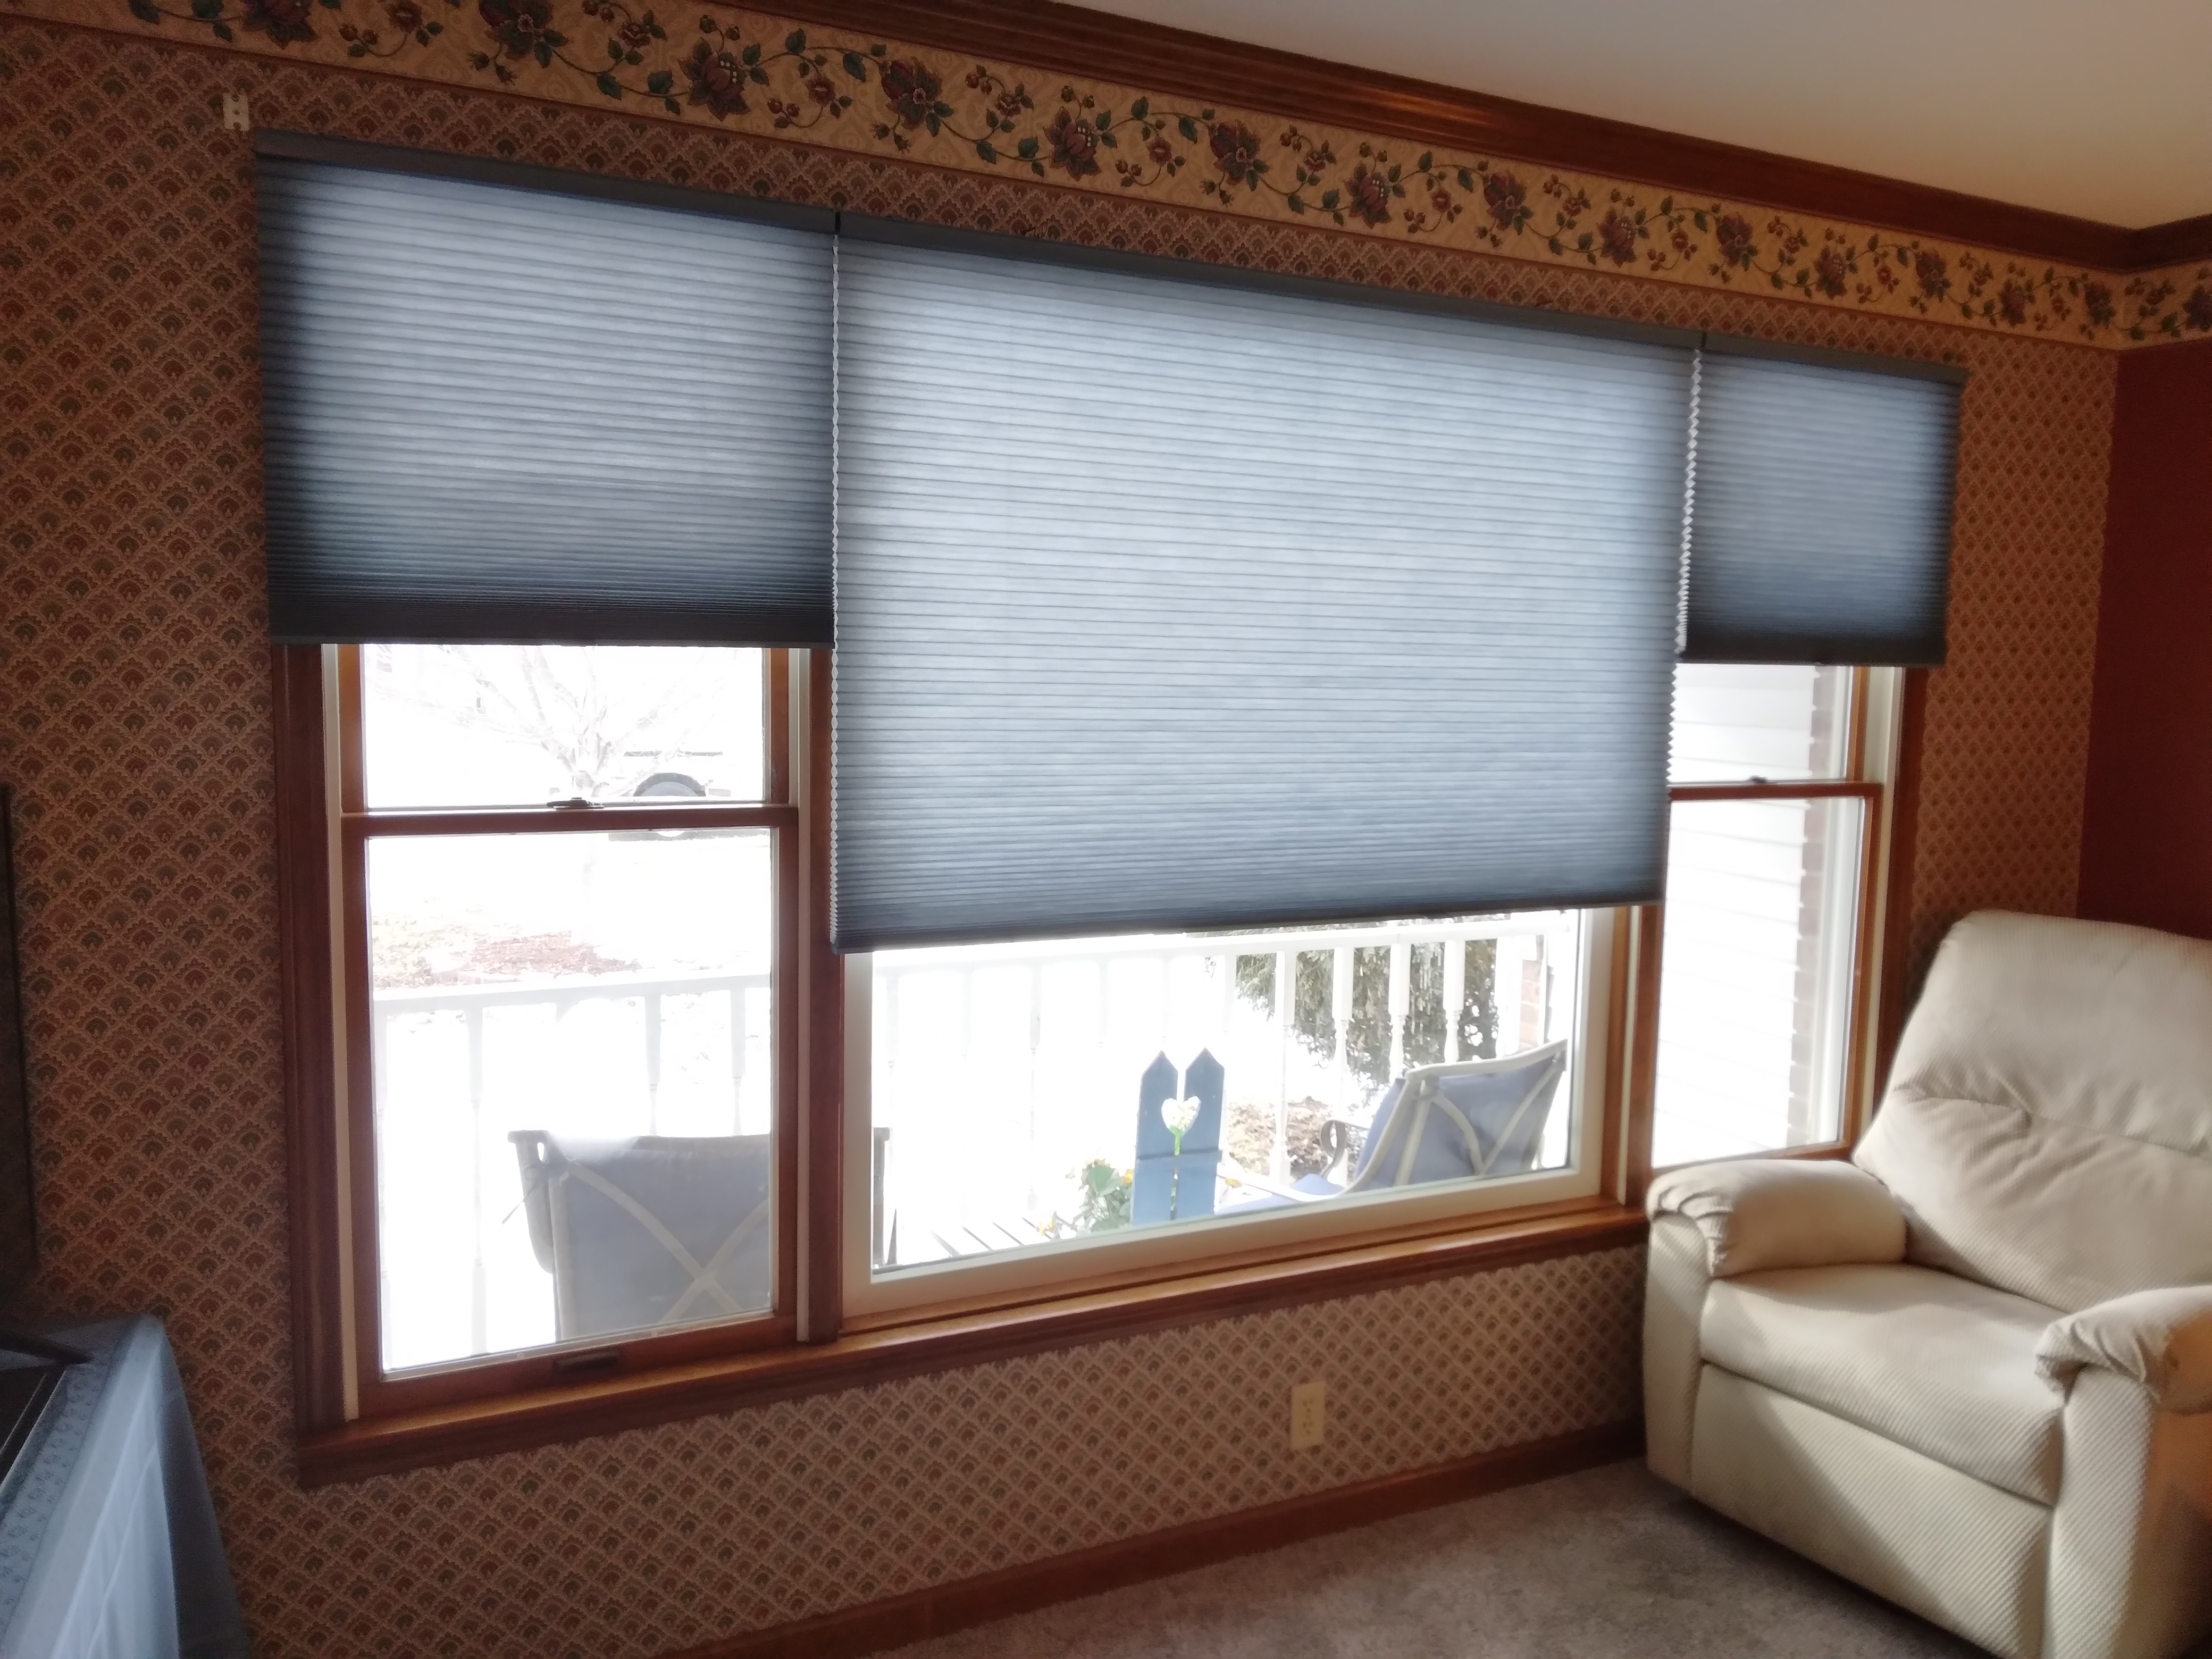 This client in Springfield Illinois chose to match her cellular shades to her living room wallpaper.  BudgetBlinds  Window Coverings  CellularShades  SpringfieldIllinois